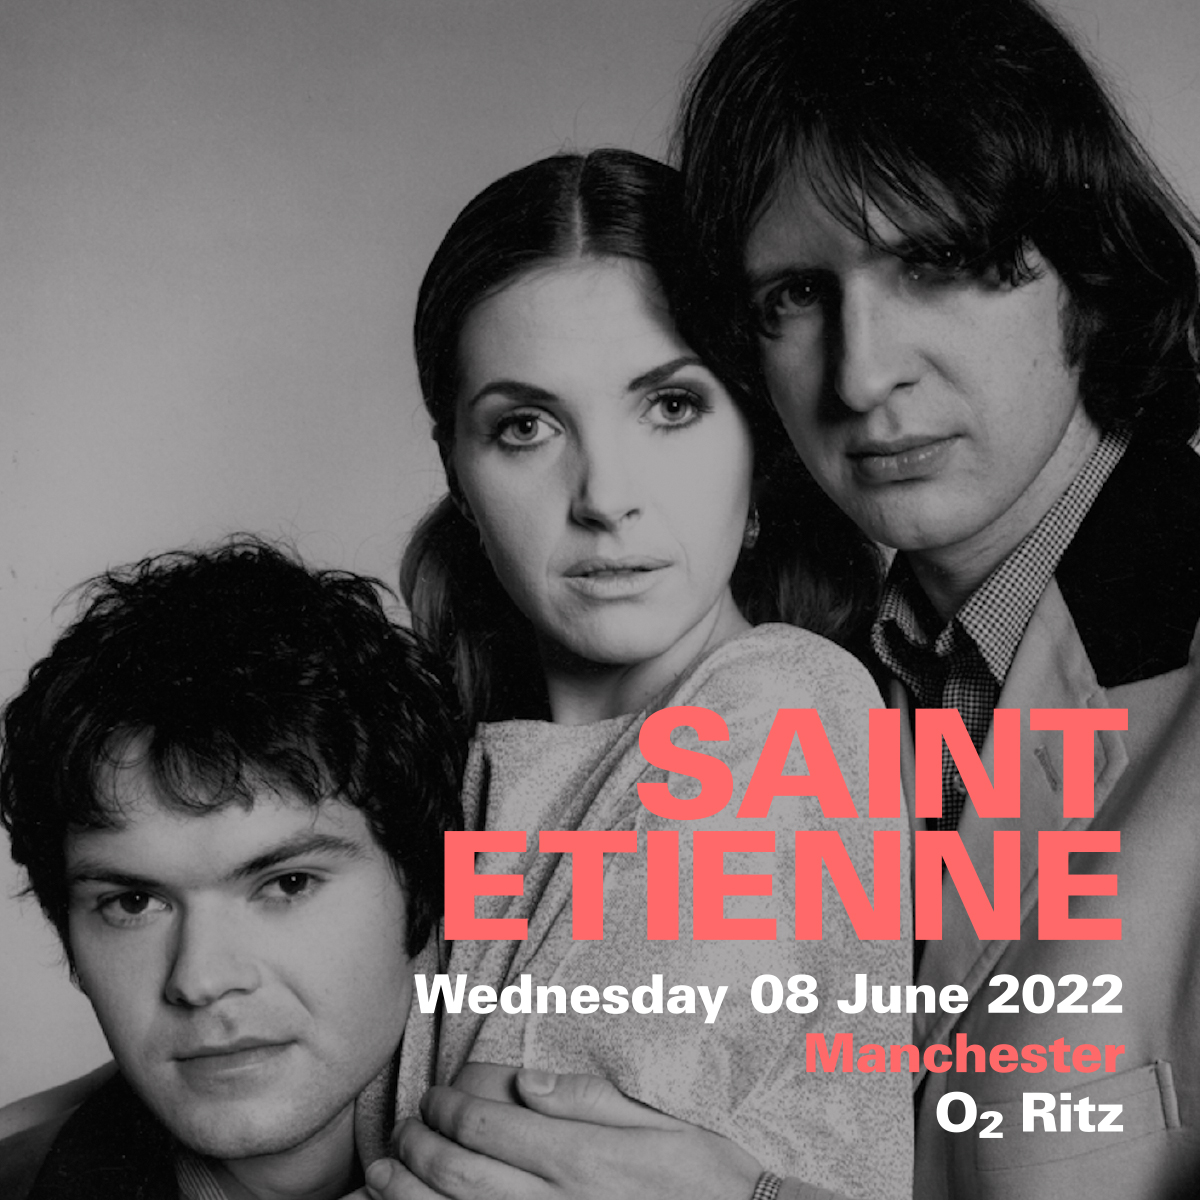 Saint Etienne play the Manchester Ritz on 8 June 22